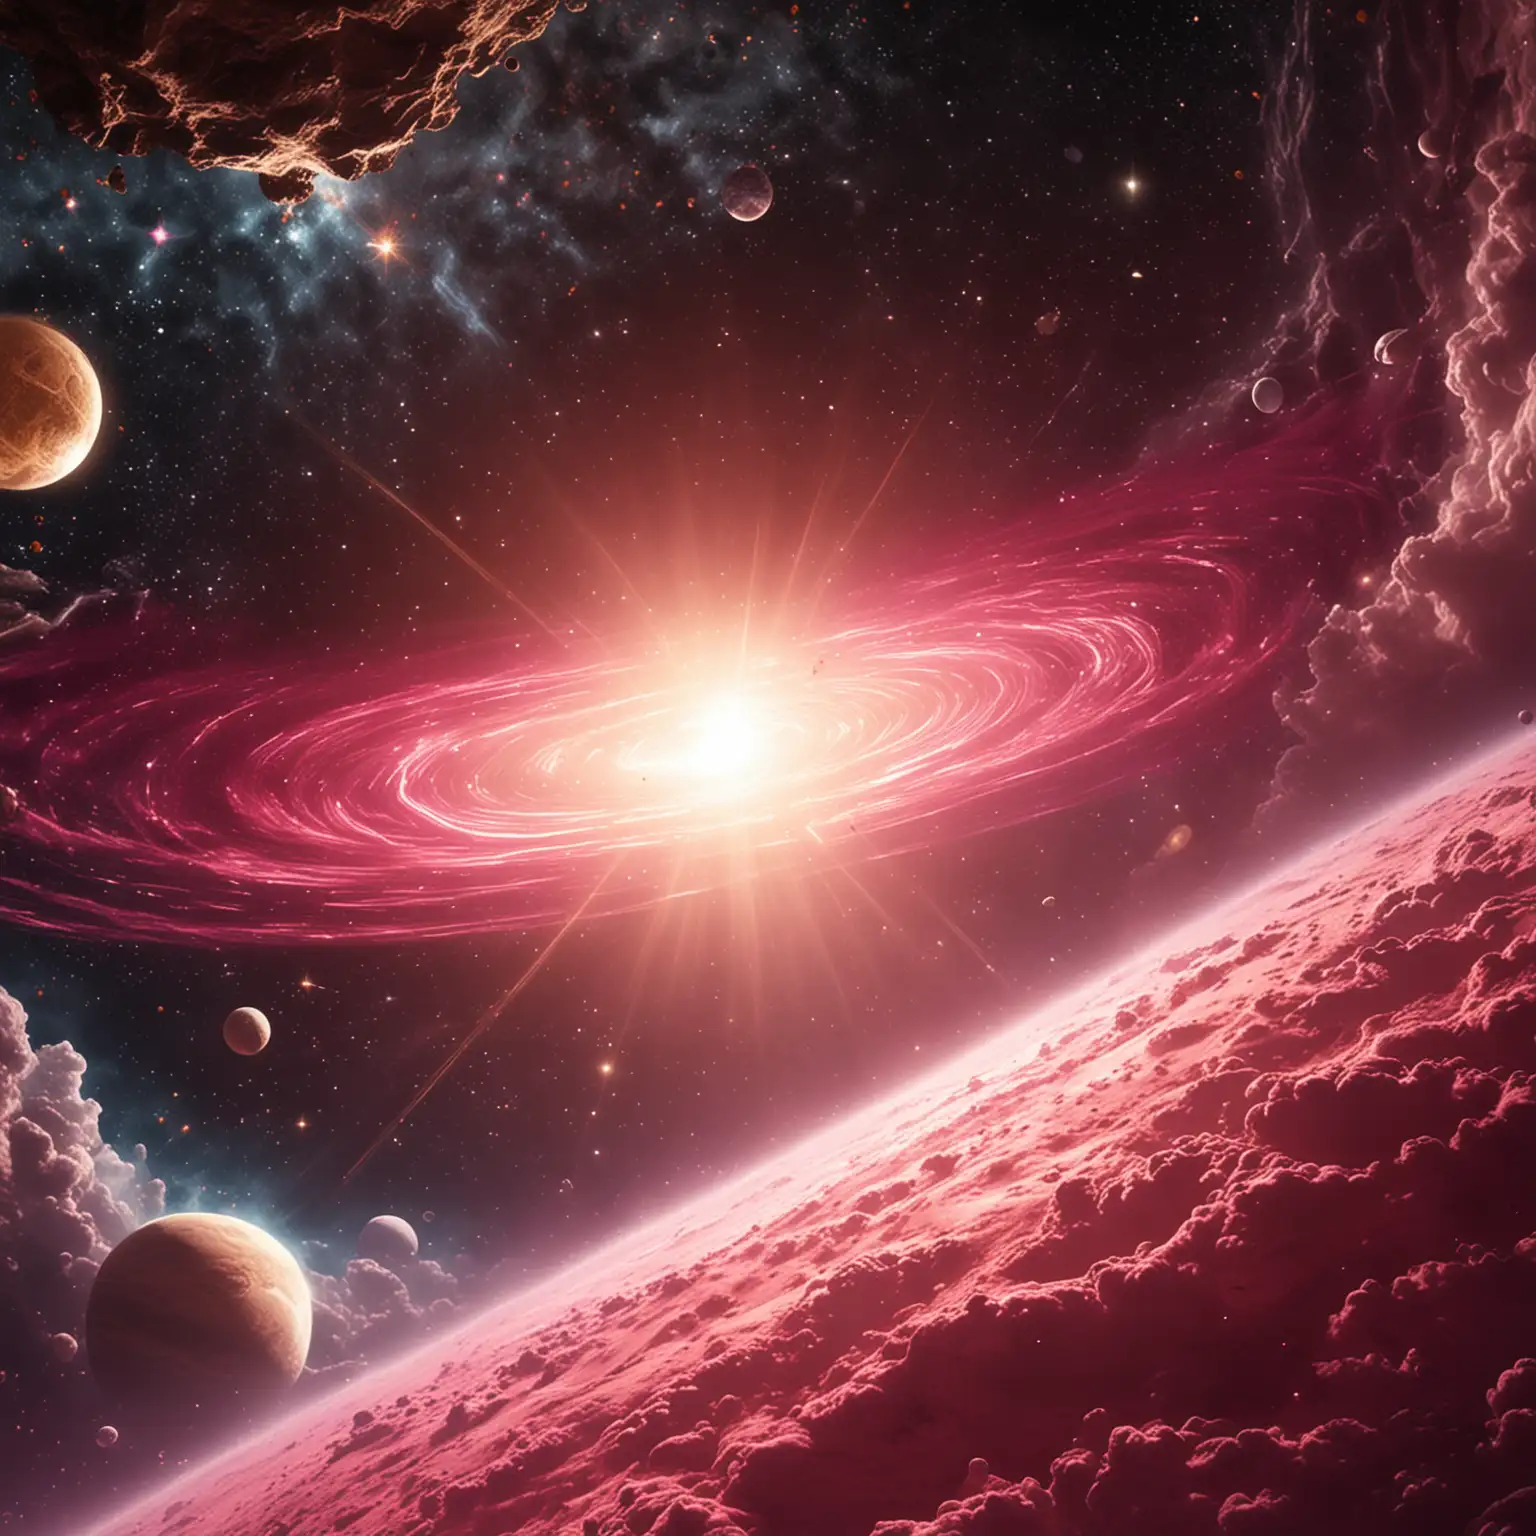 Mesmerizing Outer Space Scene with Gold and Pink Light Effects